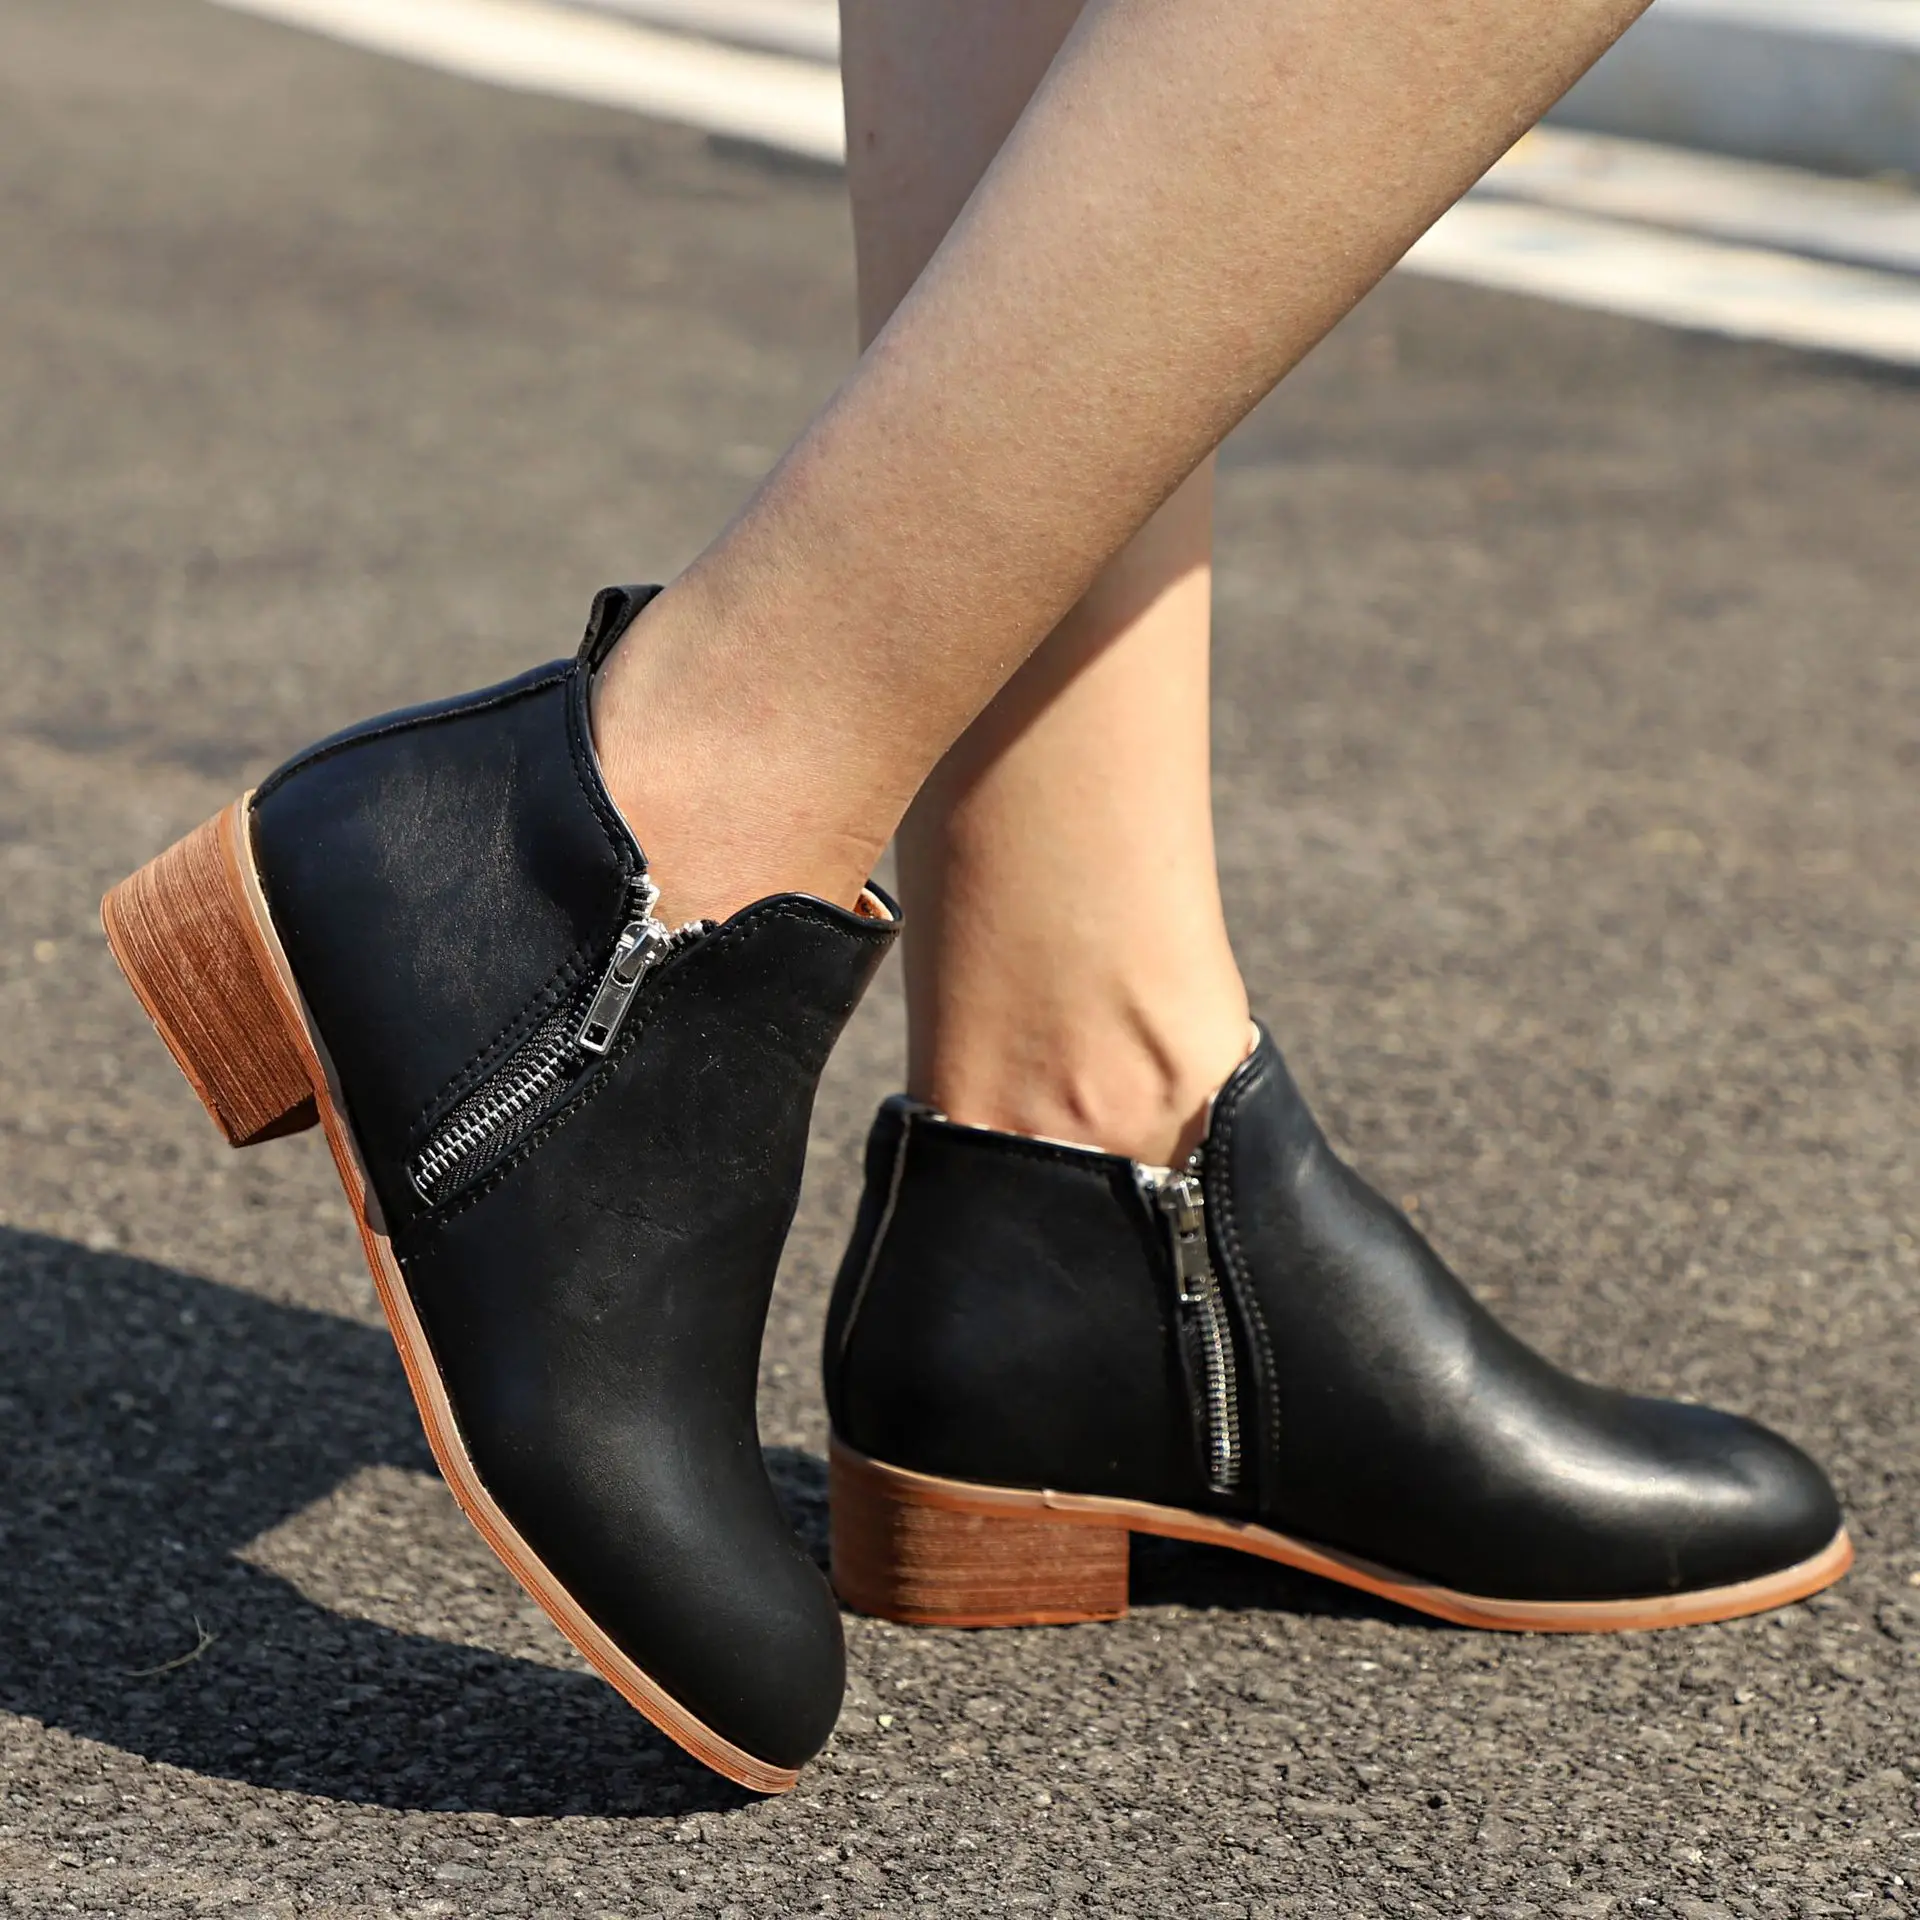 Chelsea Boots Women Spring Autumn Retro Mid Heels Round Toe Ankle Boots Fashion Side Zip Casual